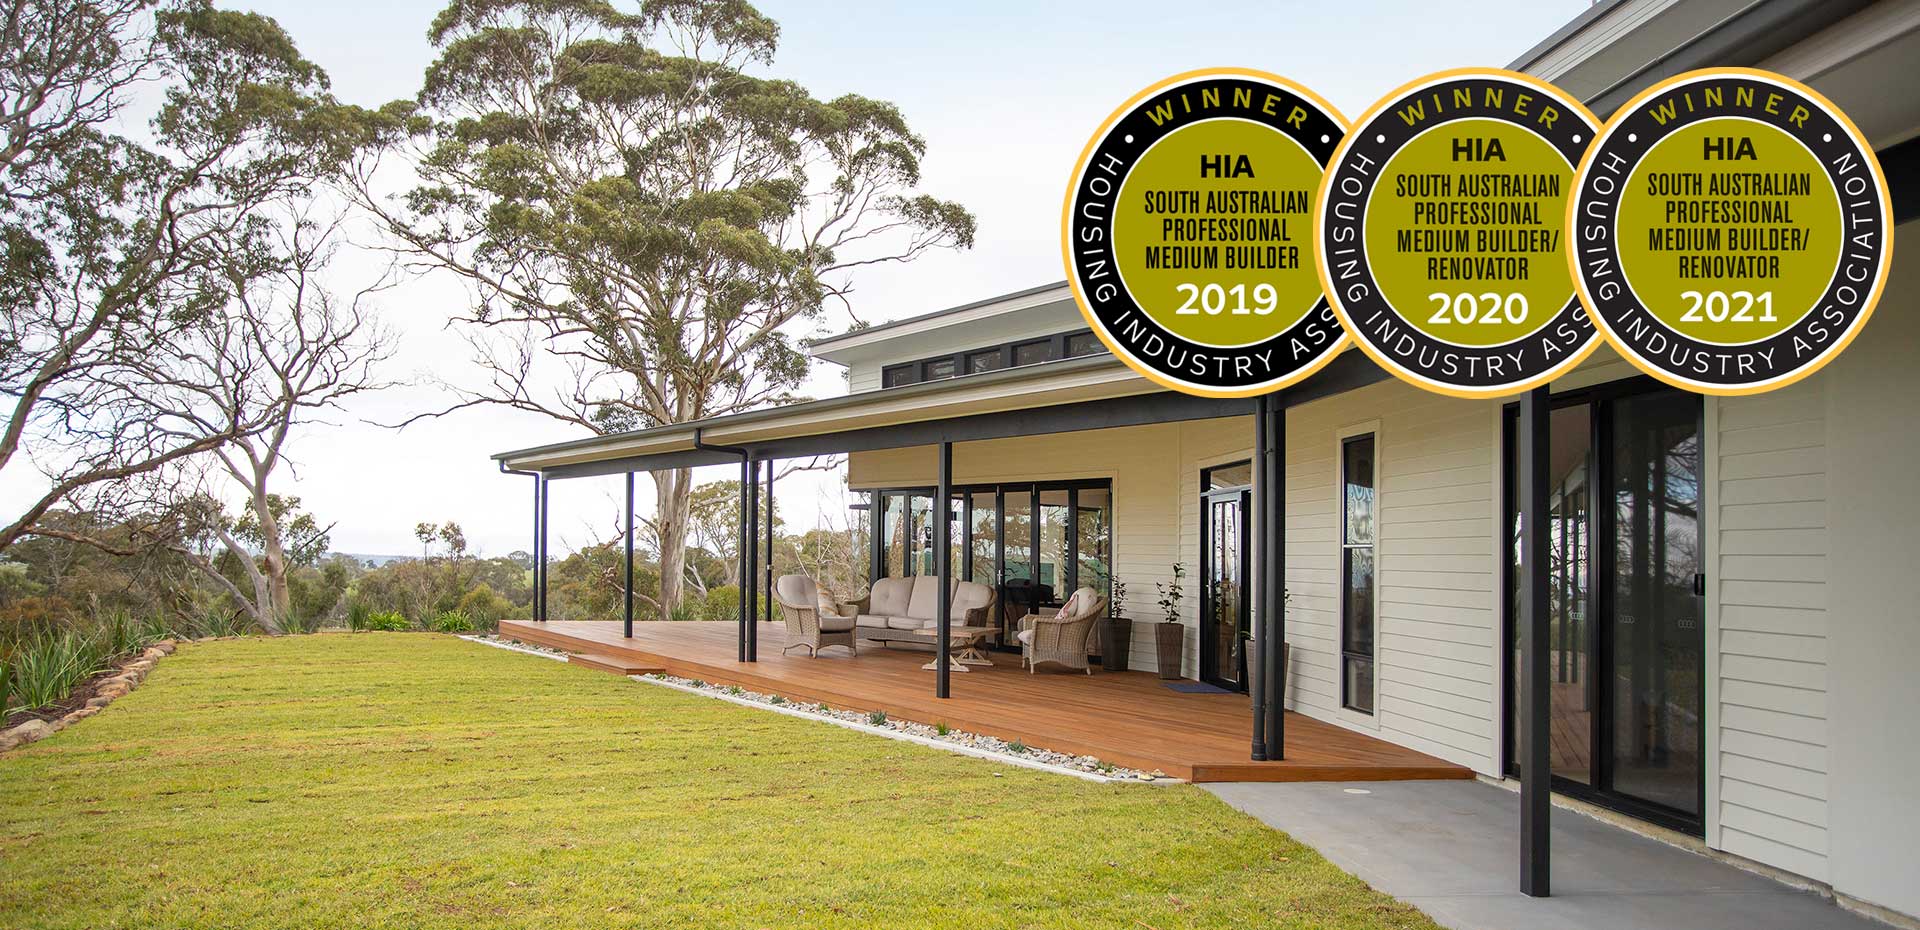 Kookaburra Homes Modern Customer Home in the Adelaide Hills with three HIA Medals for SA Professional Medium Builder three years running